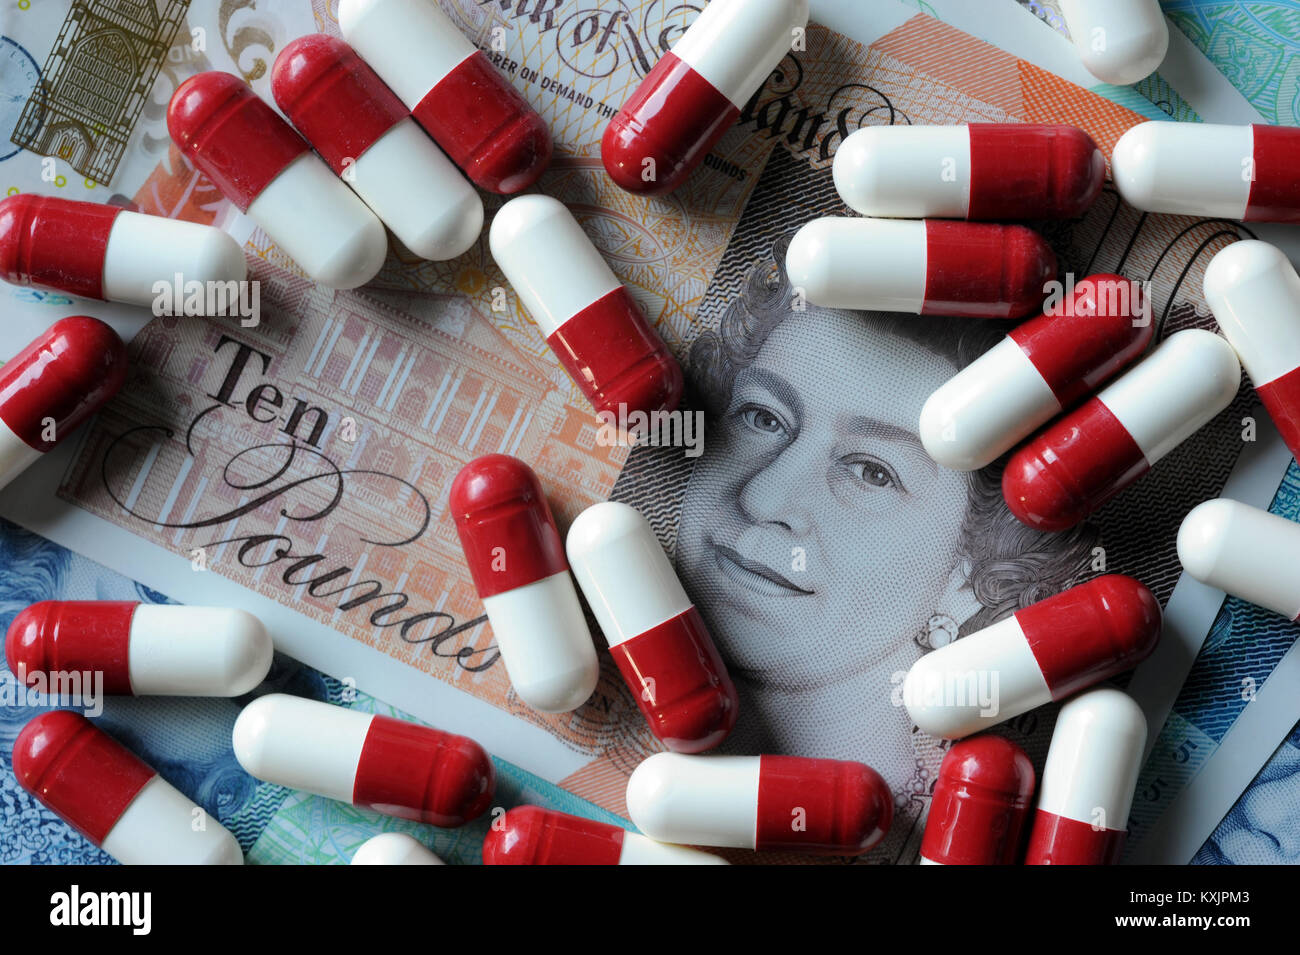 NEW BRITISH CURRENCY WITH MEDICATION CAPSULES RE COST OF HEALTHCARE PRESCRIPTIONS MEDICINE NHS GP DRUGS ETC UK Stock Photo